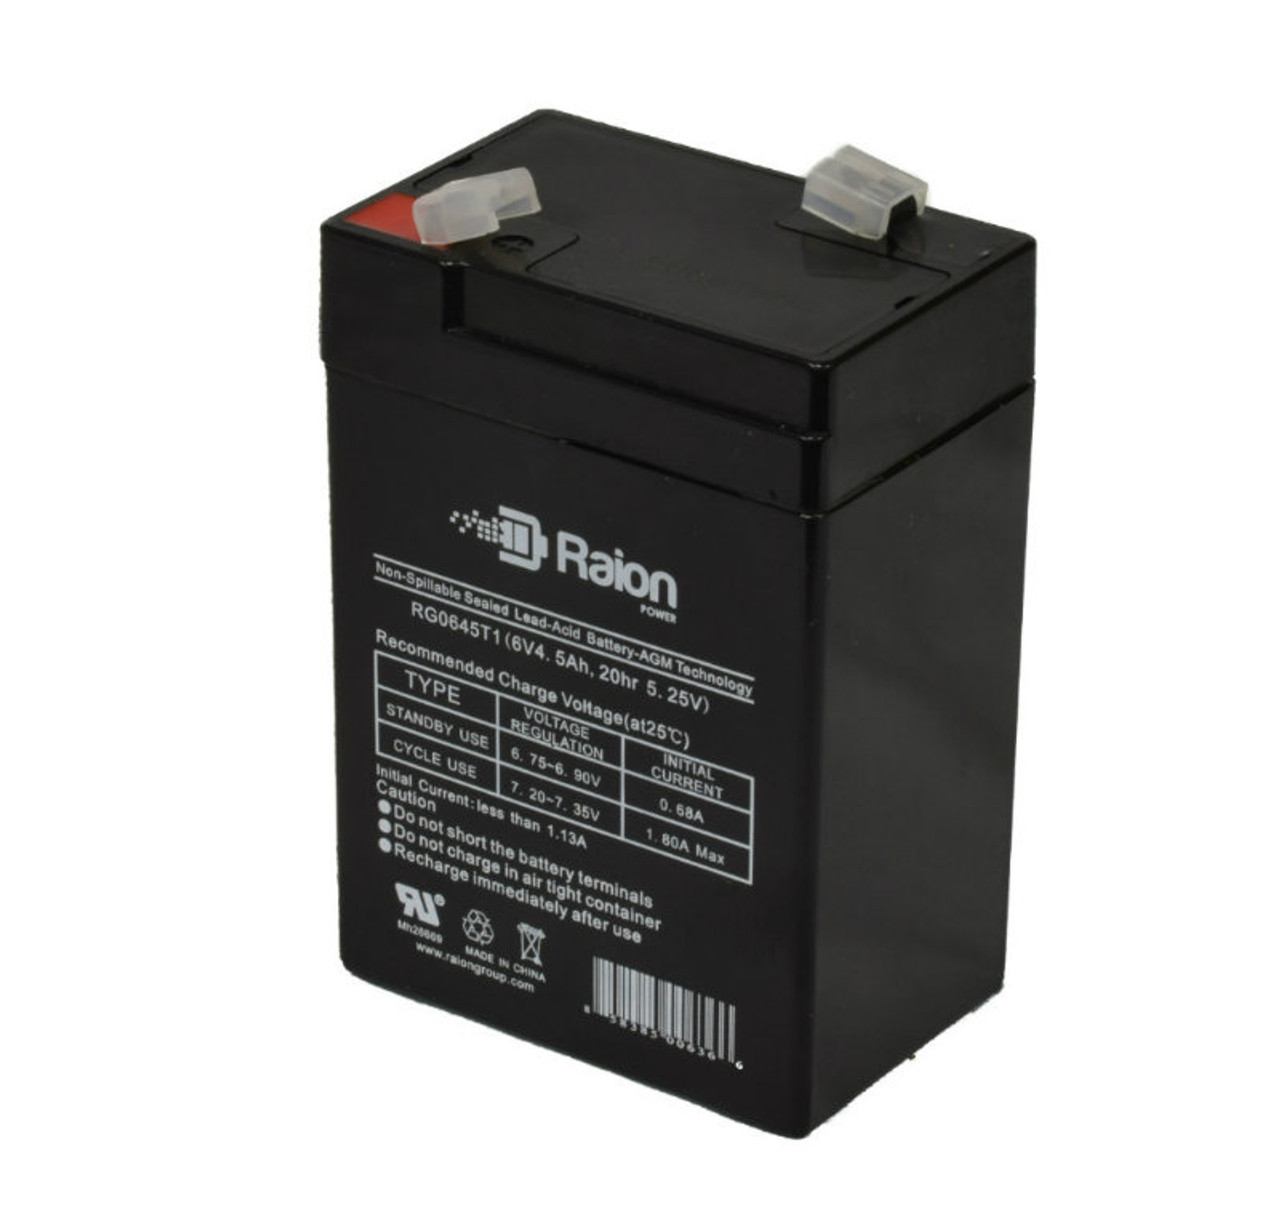 Raion Power RG0645T1 6V 4.5Ah Replacement Battery Cartridge for Tianchang TC6-6